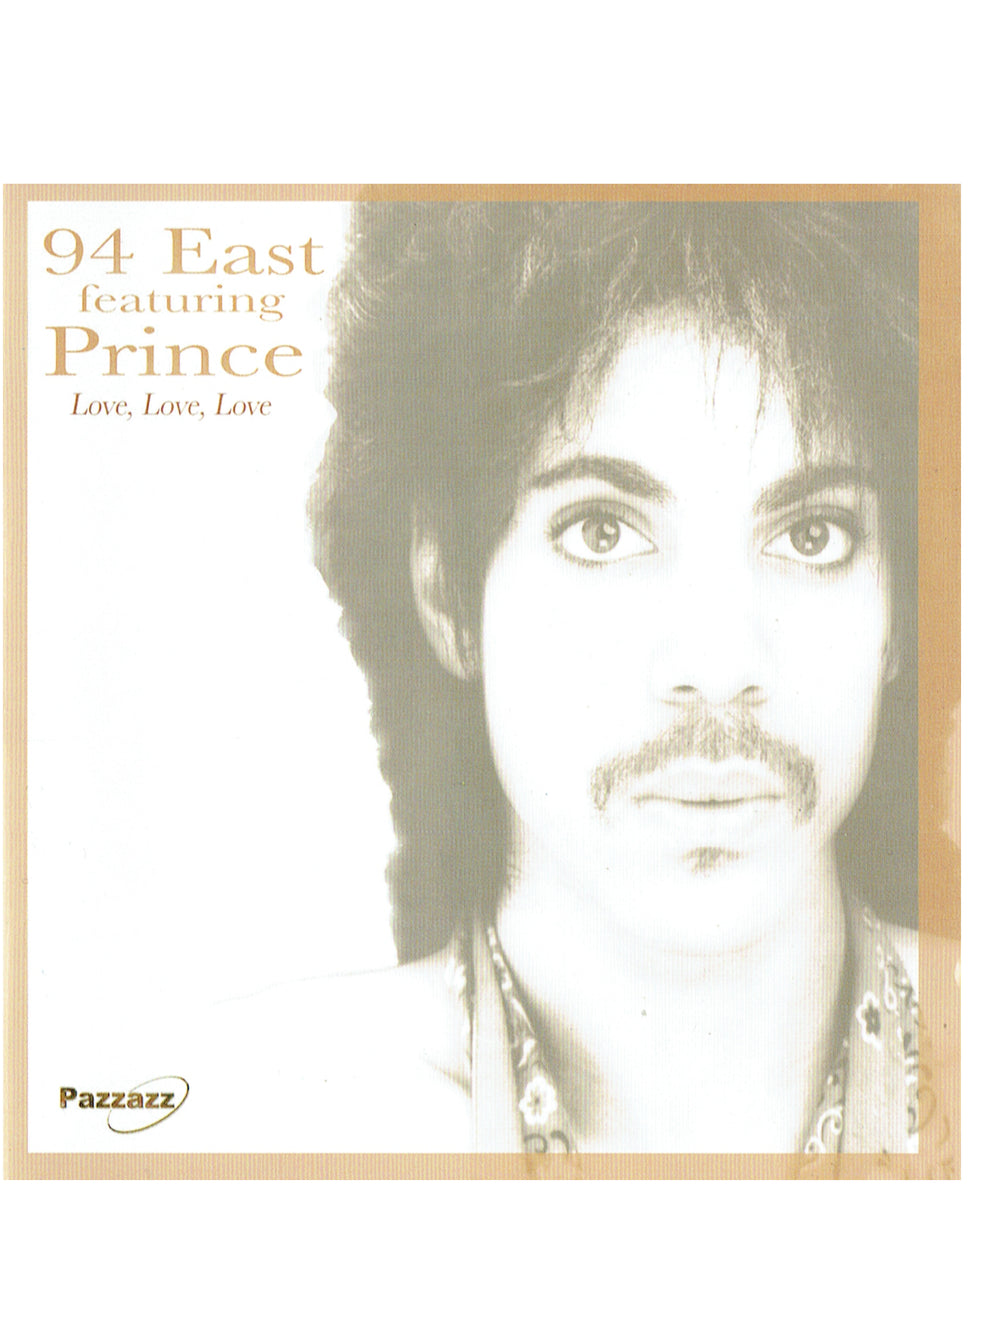 94 East Featuring Prince Love Love Love CD Compact Disc Brand New